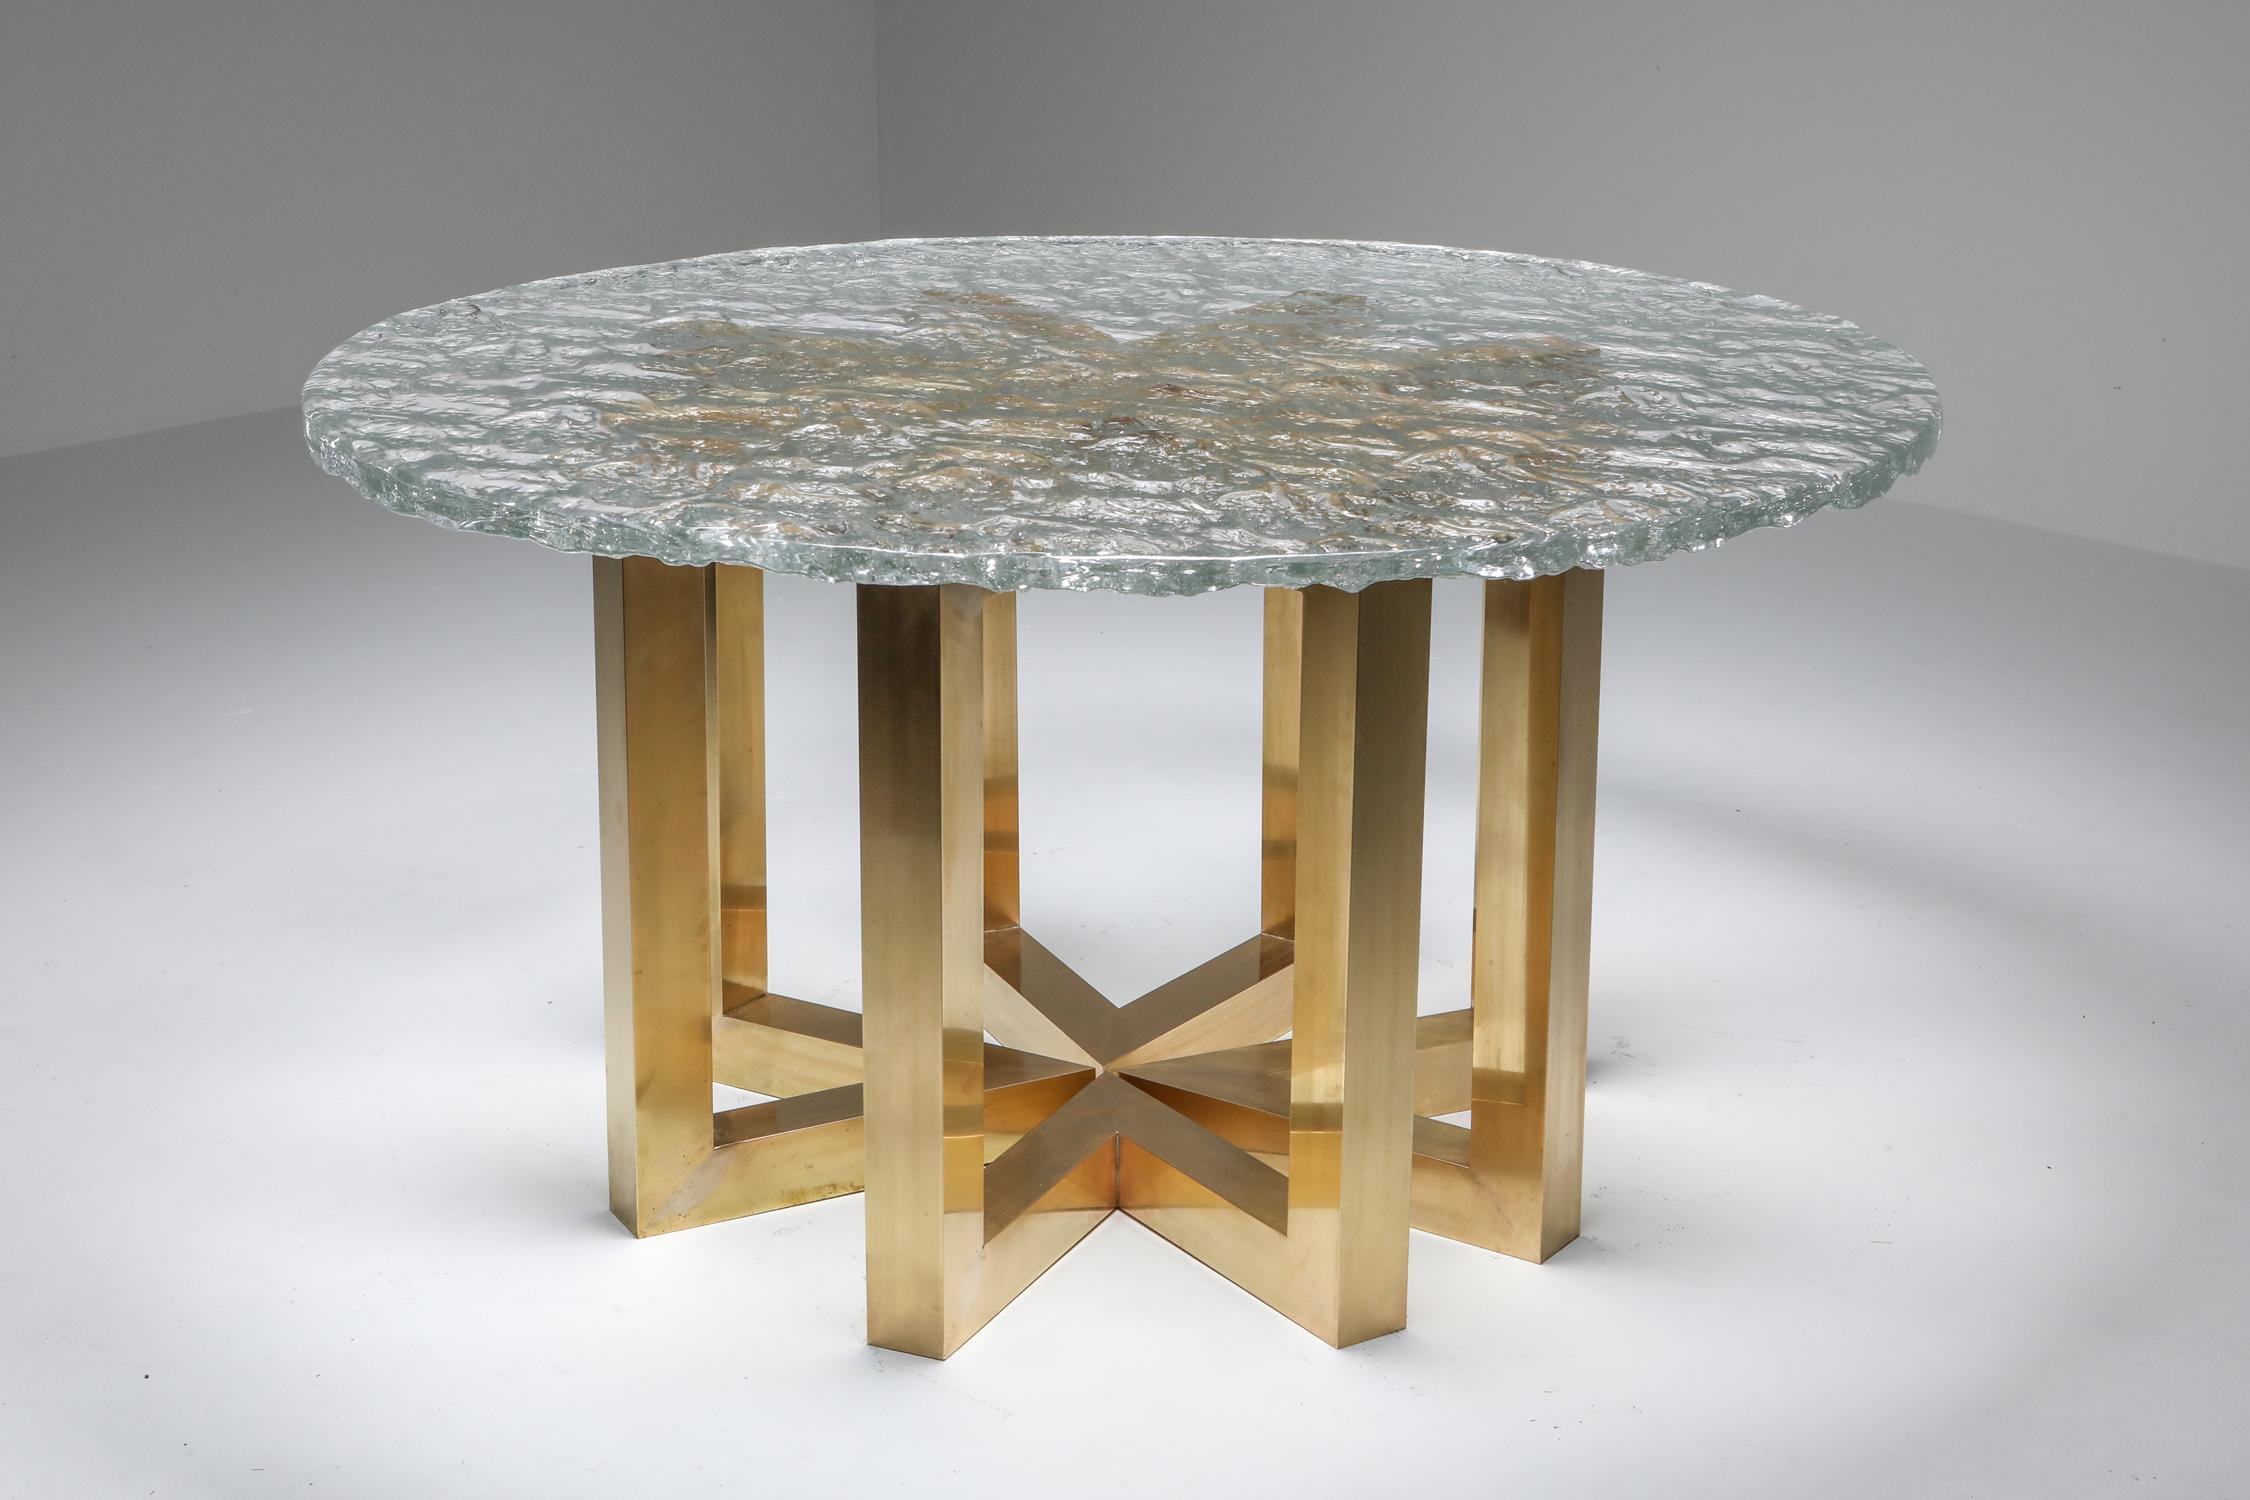 Poliarte table, brass segmented base and hand casted glass top dining table, Italy, 1970s

One of the most impressive tables in the current collection.
Murano hand forged glass top mounted on four brass triangular segments.
Ø 155 cm it fits six